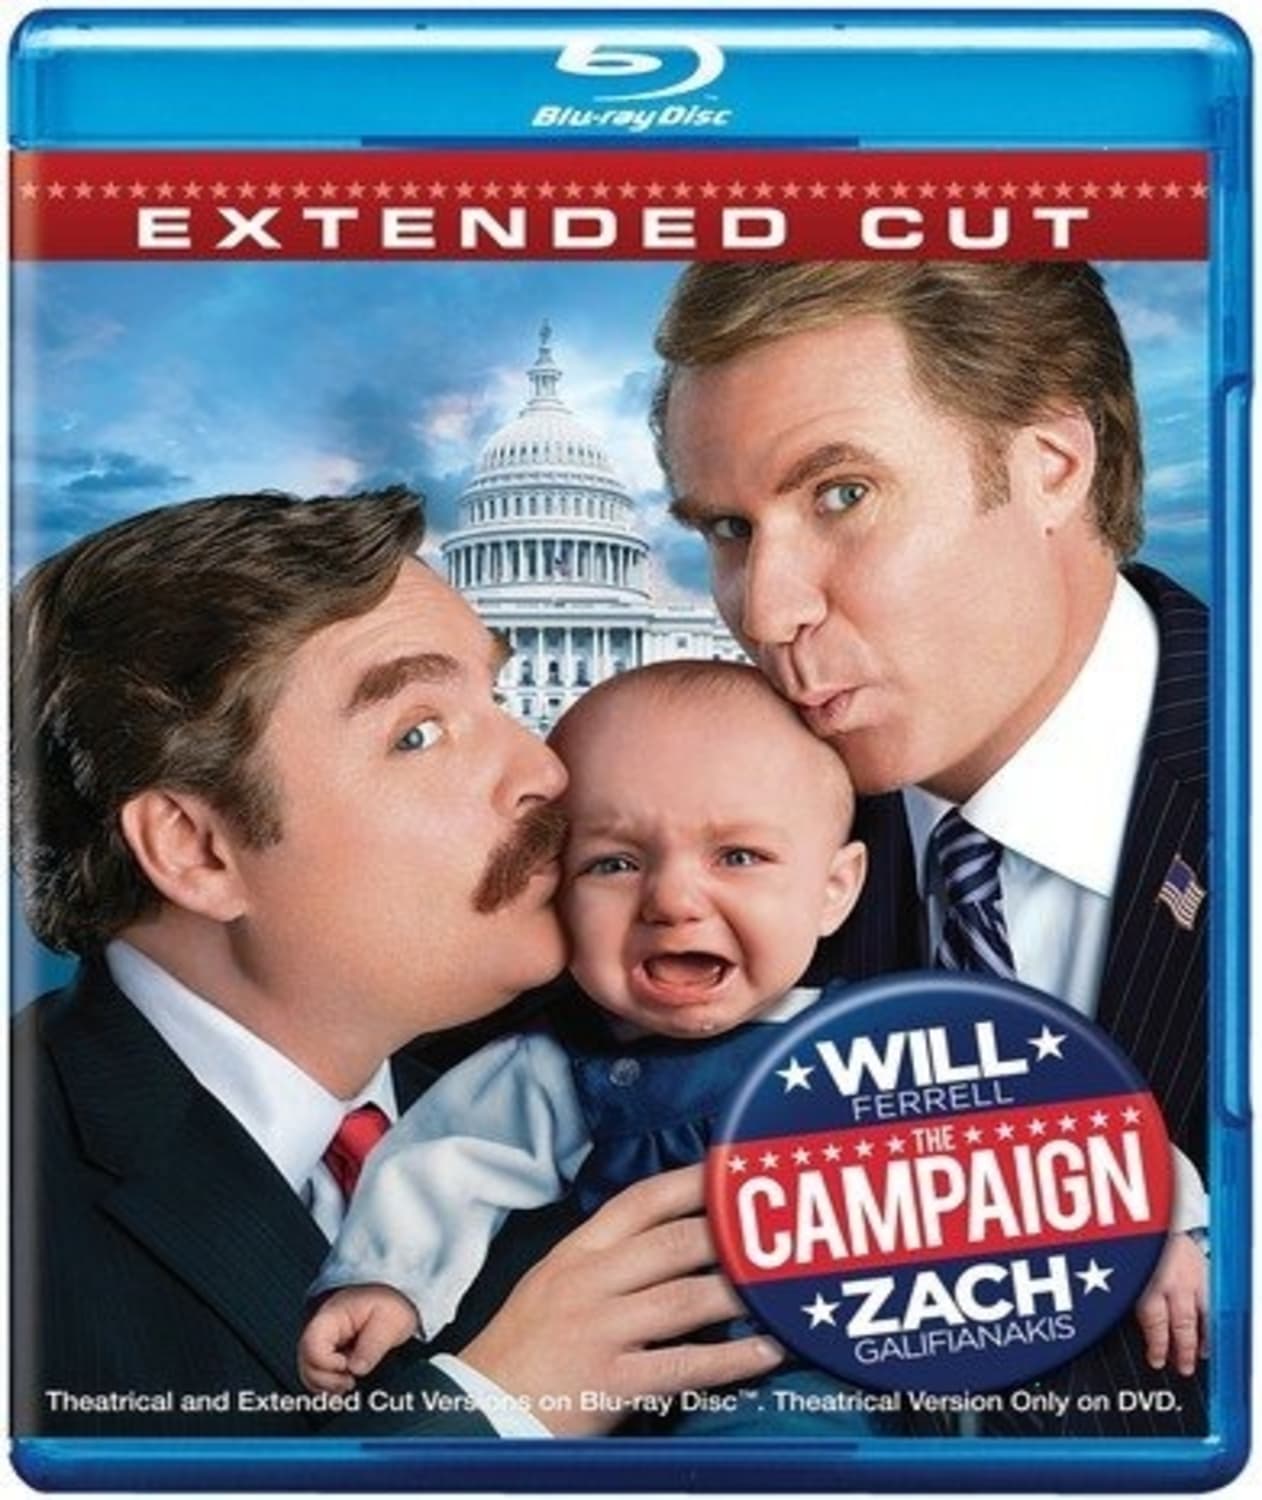 The Campaign (Blu-ray) on MovieShack